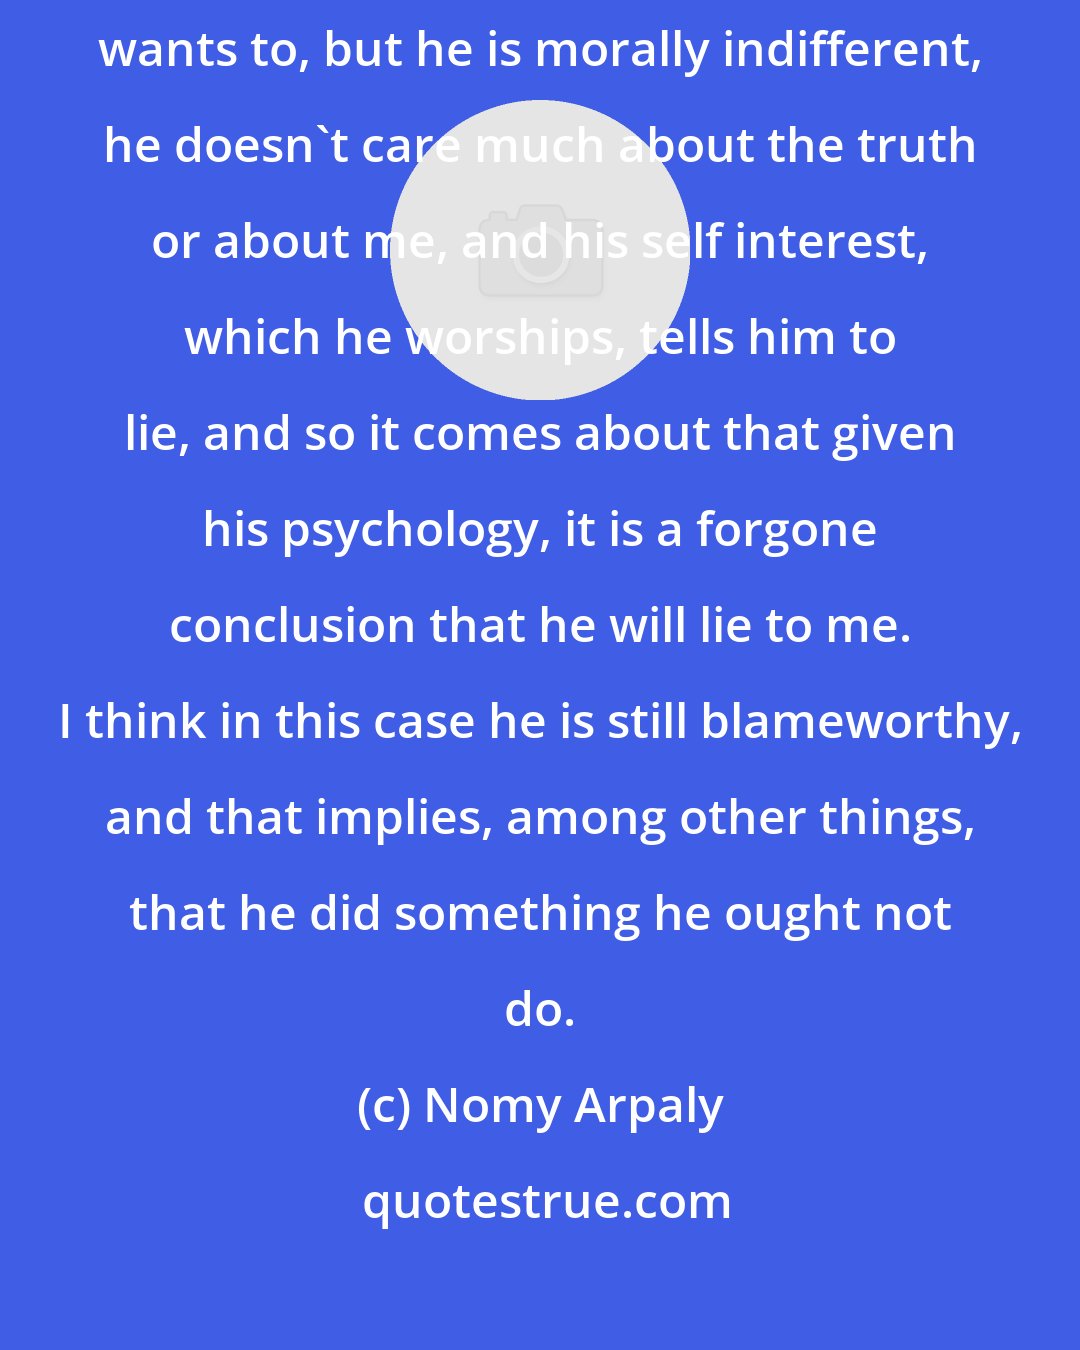 Nomy Arpaly: Suppose whether or not someone tells me a lie depends only on whether he wants to, but he is morally indifferent, he doesn't care much about the truth or about me, and his self interest, which he worships, tells him to lie, and so it comes about that given his psychology, it is a forgone conclusion that he will lie to me. I think in this case he is still blameworthy, and that implies, among other things, that he did something he ought not do.